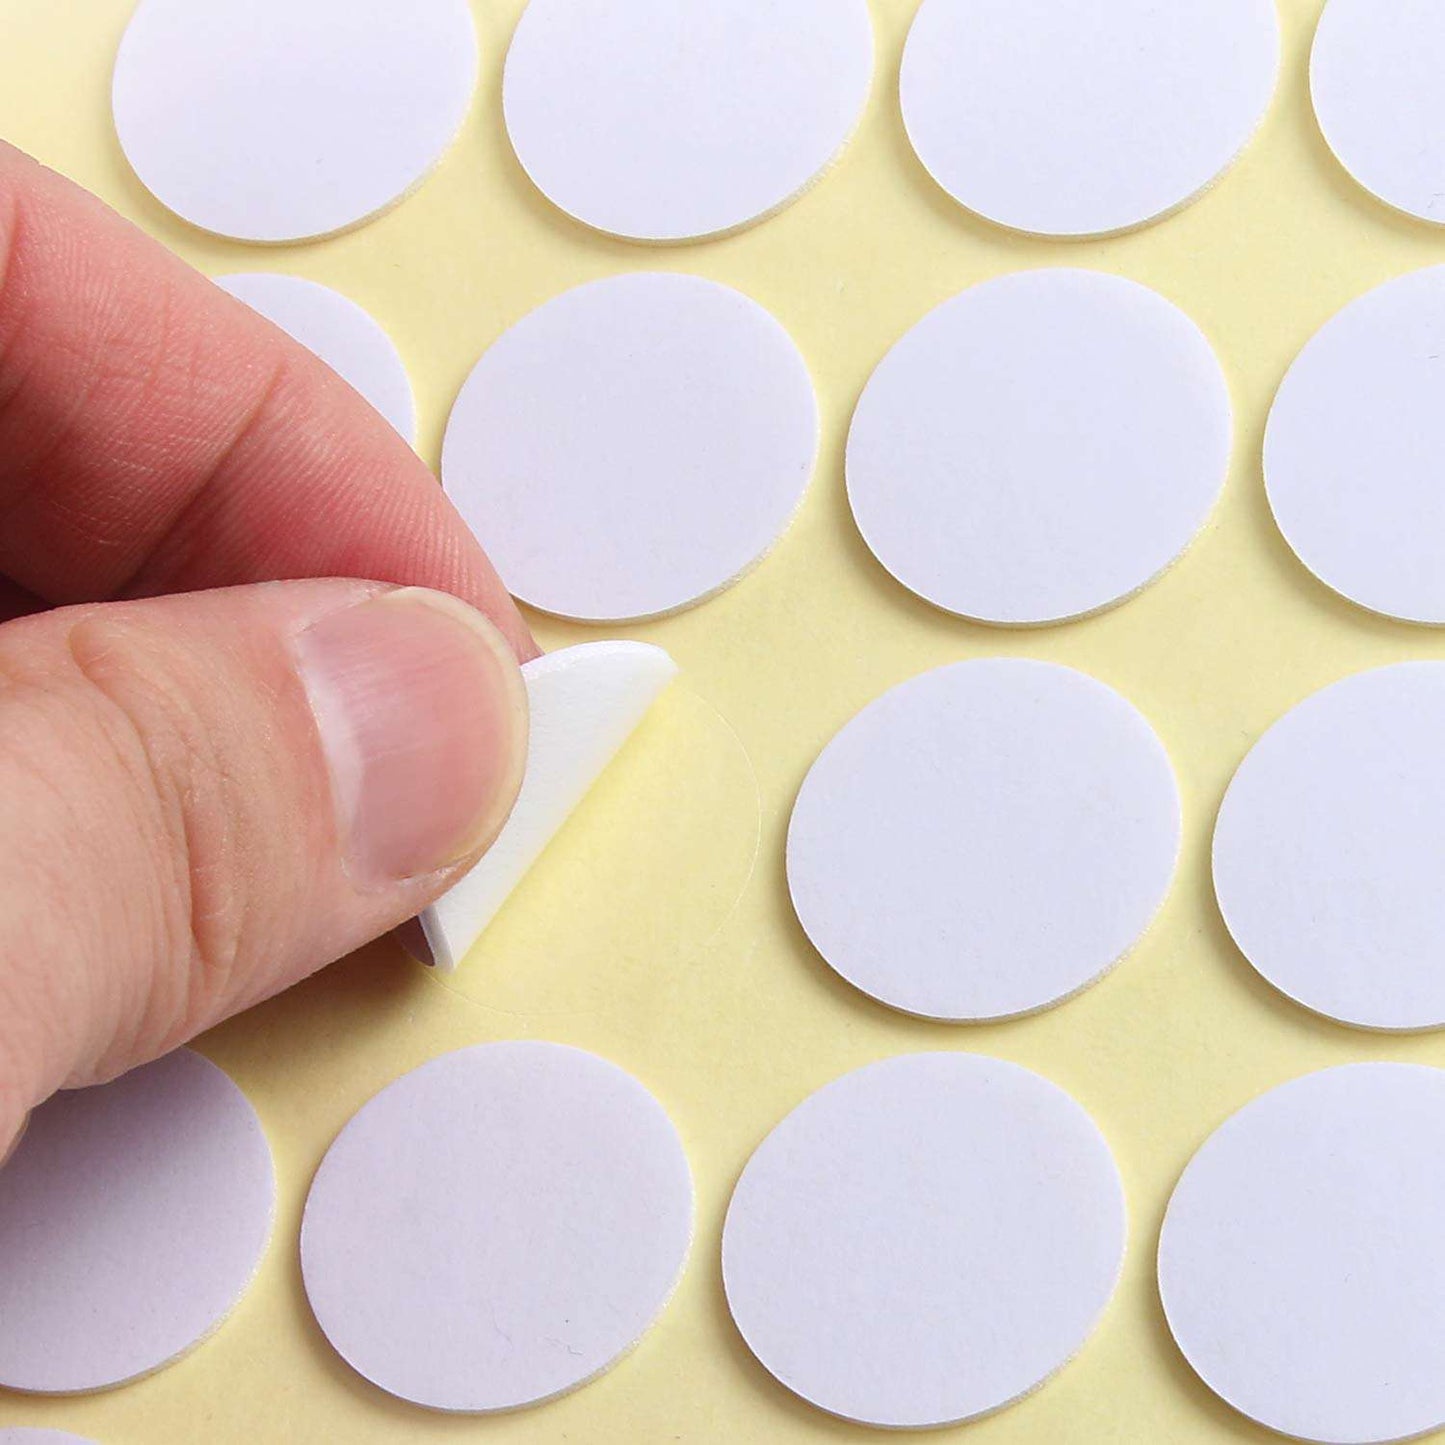 400pcs Candle Wick Stickers, Heat Resistance Candle Making Double-Sided Stickers - Hatke